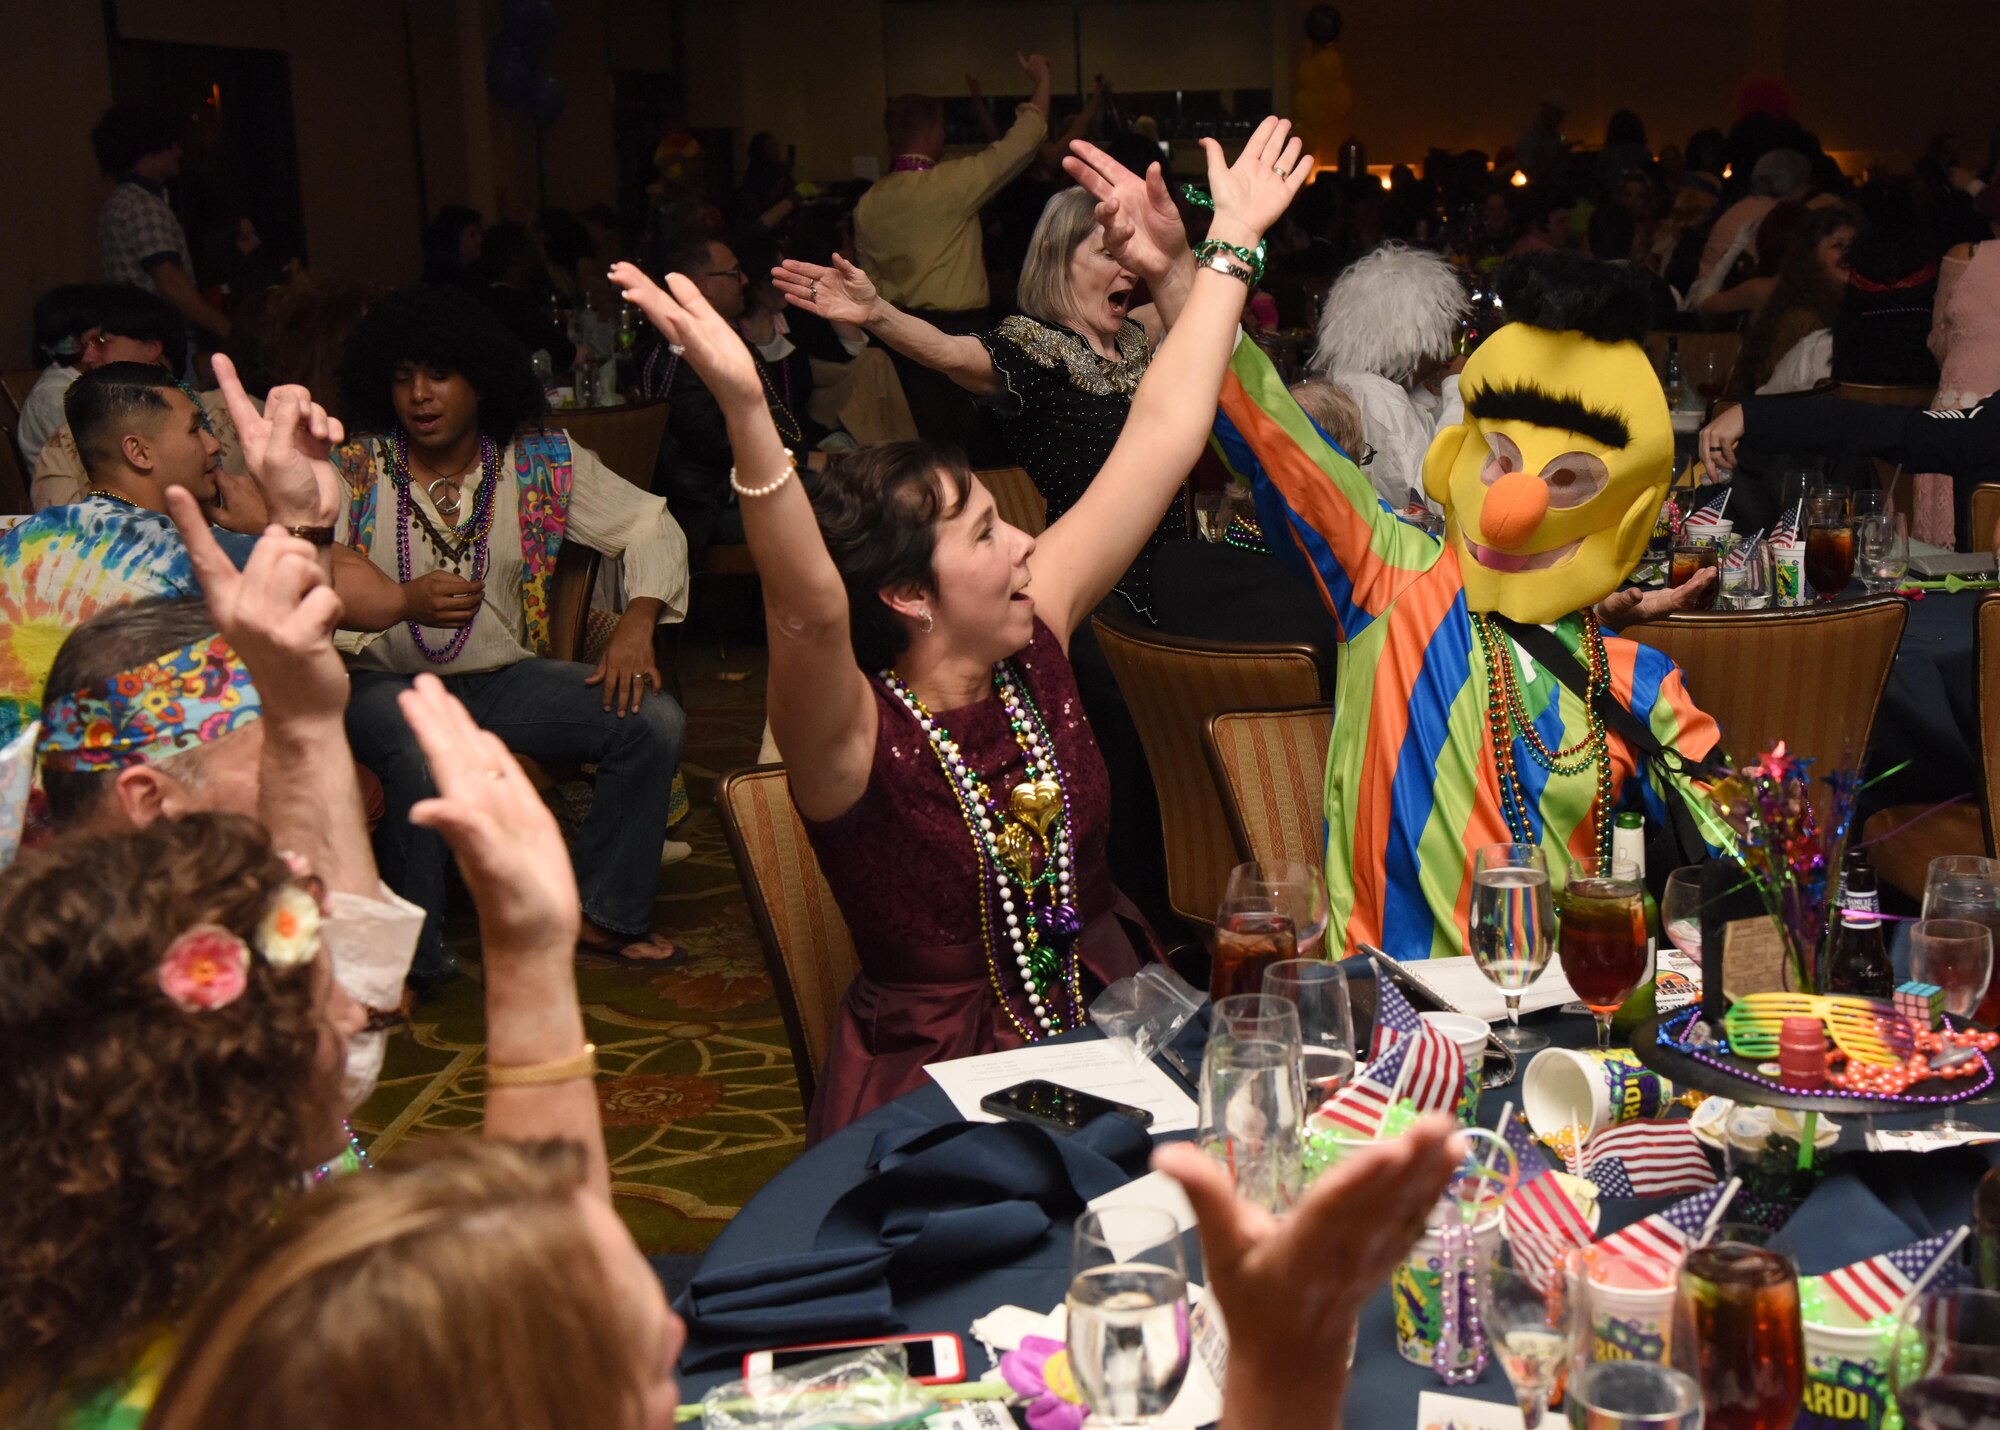 Col. Jeannine Ryder, 81st Medical Group commander, and Chief Master Sgt. Karl Day, 81st MDG superintendent, participate in a “YMCA” dance during the 29th Annual Krewe of Medics Mardi Gras Ball at the Bay Breeze Event Center Jan. 28, 2017, on Keesler Air Force Base, Miss. The Krewe of Medics hosts a yearly ball to give Keesler Medical Center personnel a taste of the Gulf Coast and an opportunity to experience a traditional Mardi Gras. The theme for this year's ball was Blast From The Past. (U.S. Air Force photo by Kemberly Groue)